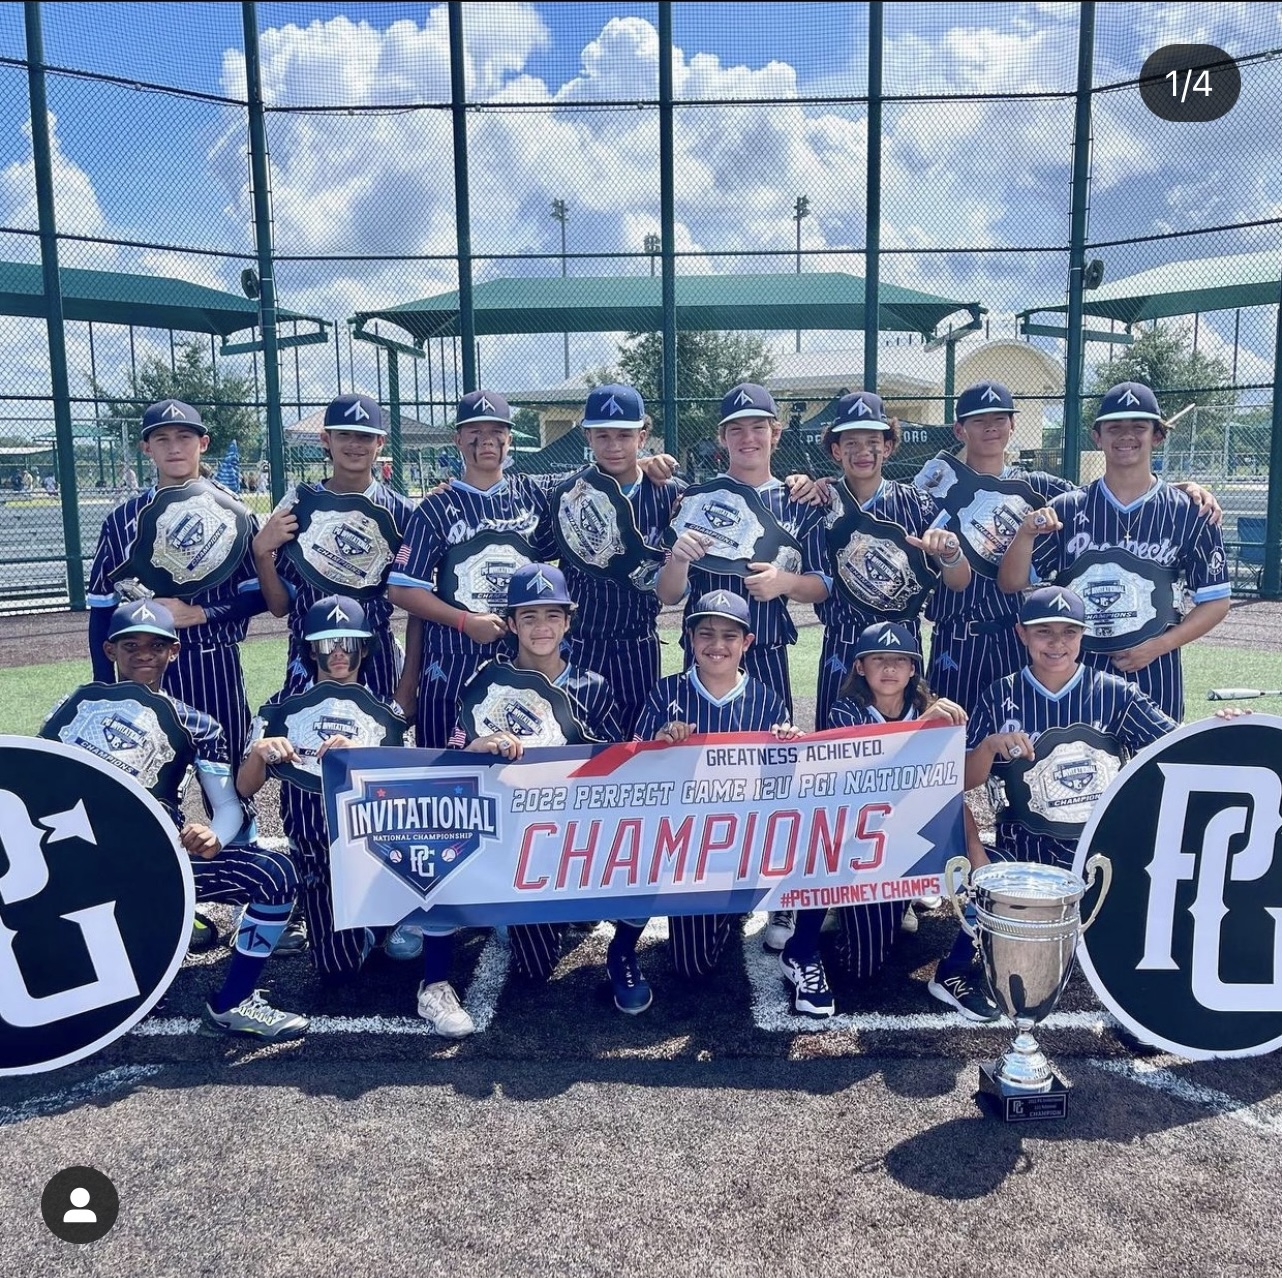 ZT National Prospects 12U took home first place at the Perfect Game Invitational in Orlando, Florida